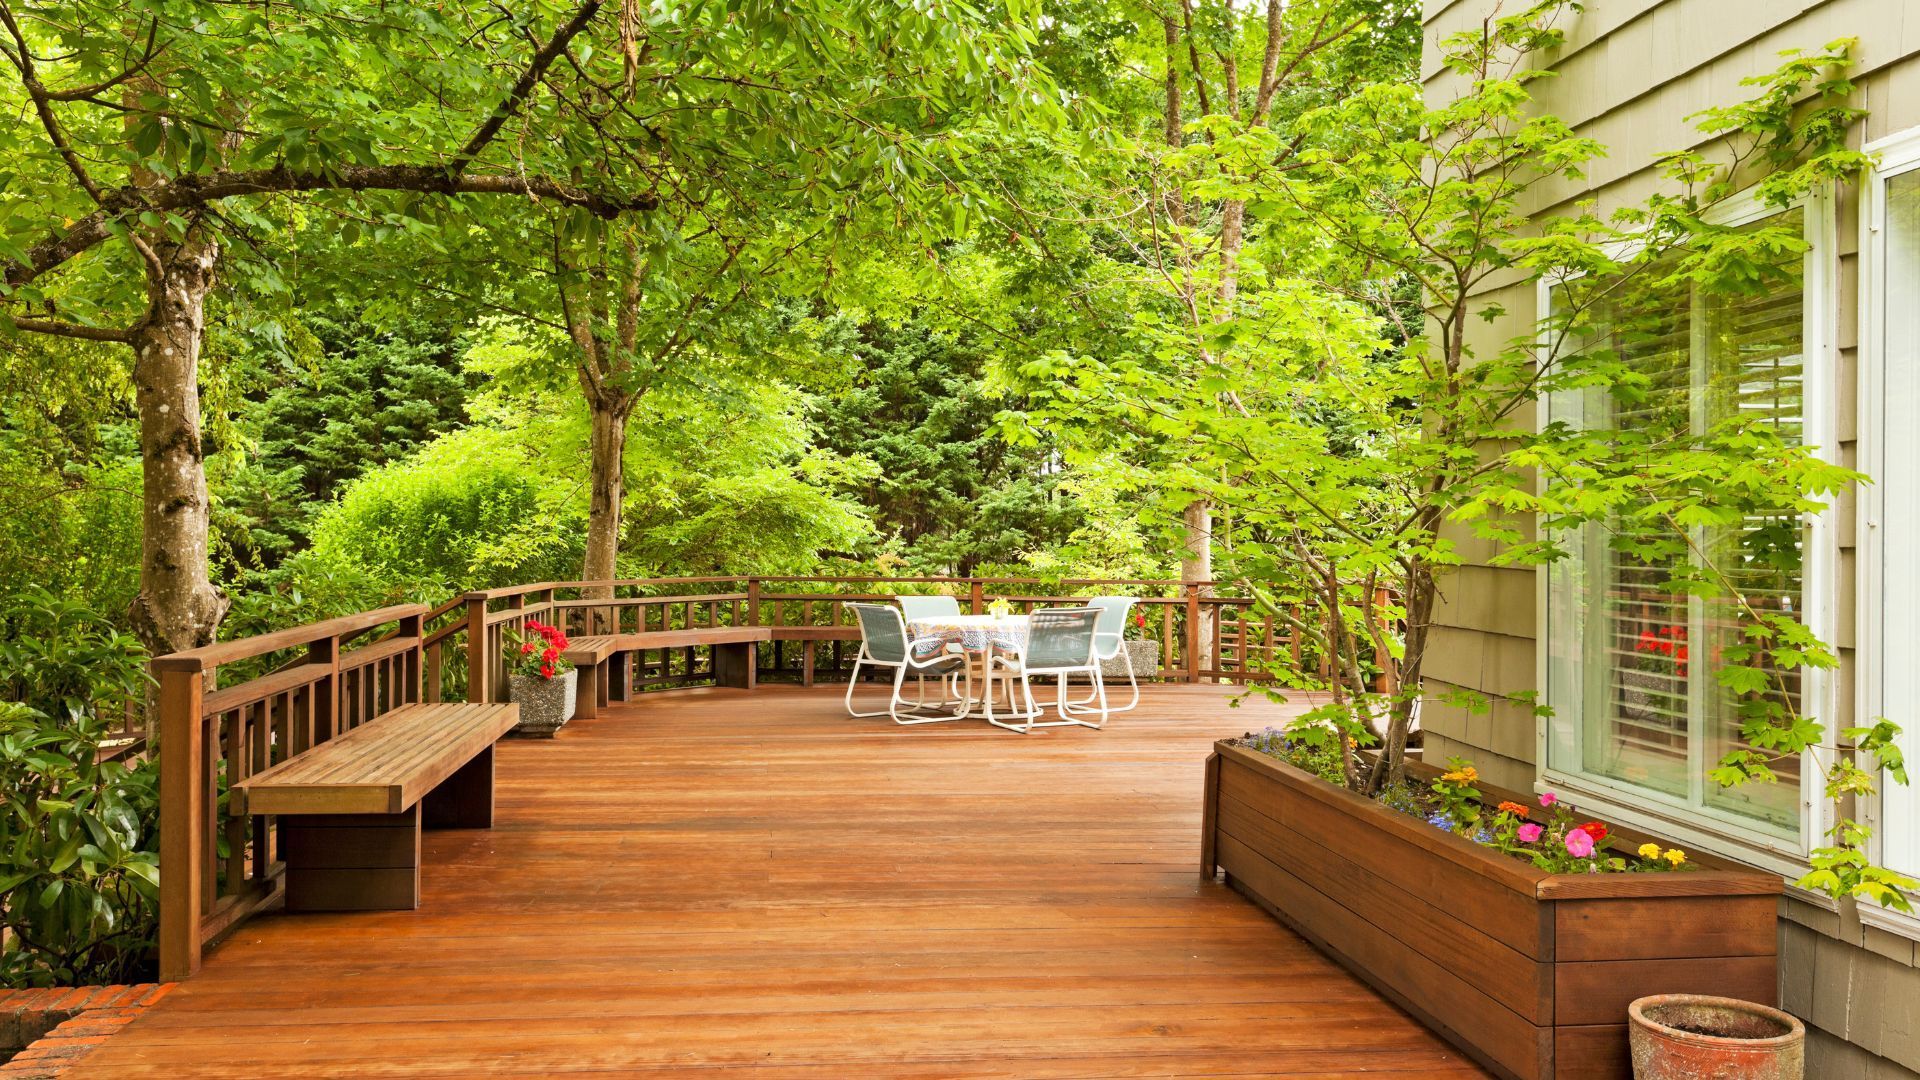 Warm wooden deck with seating and patio set, surrounded by Saint Paul's lush foliage.